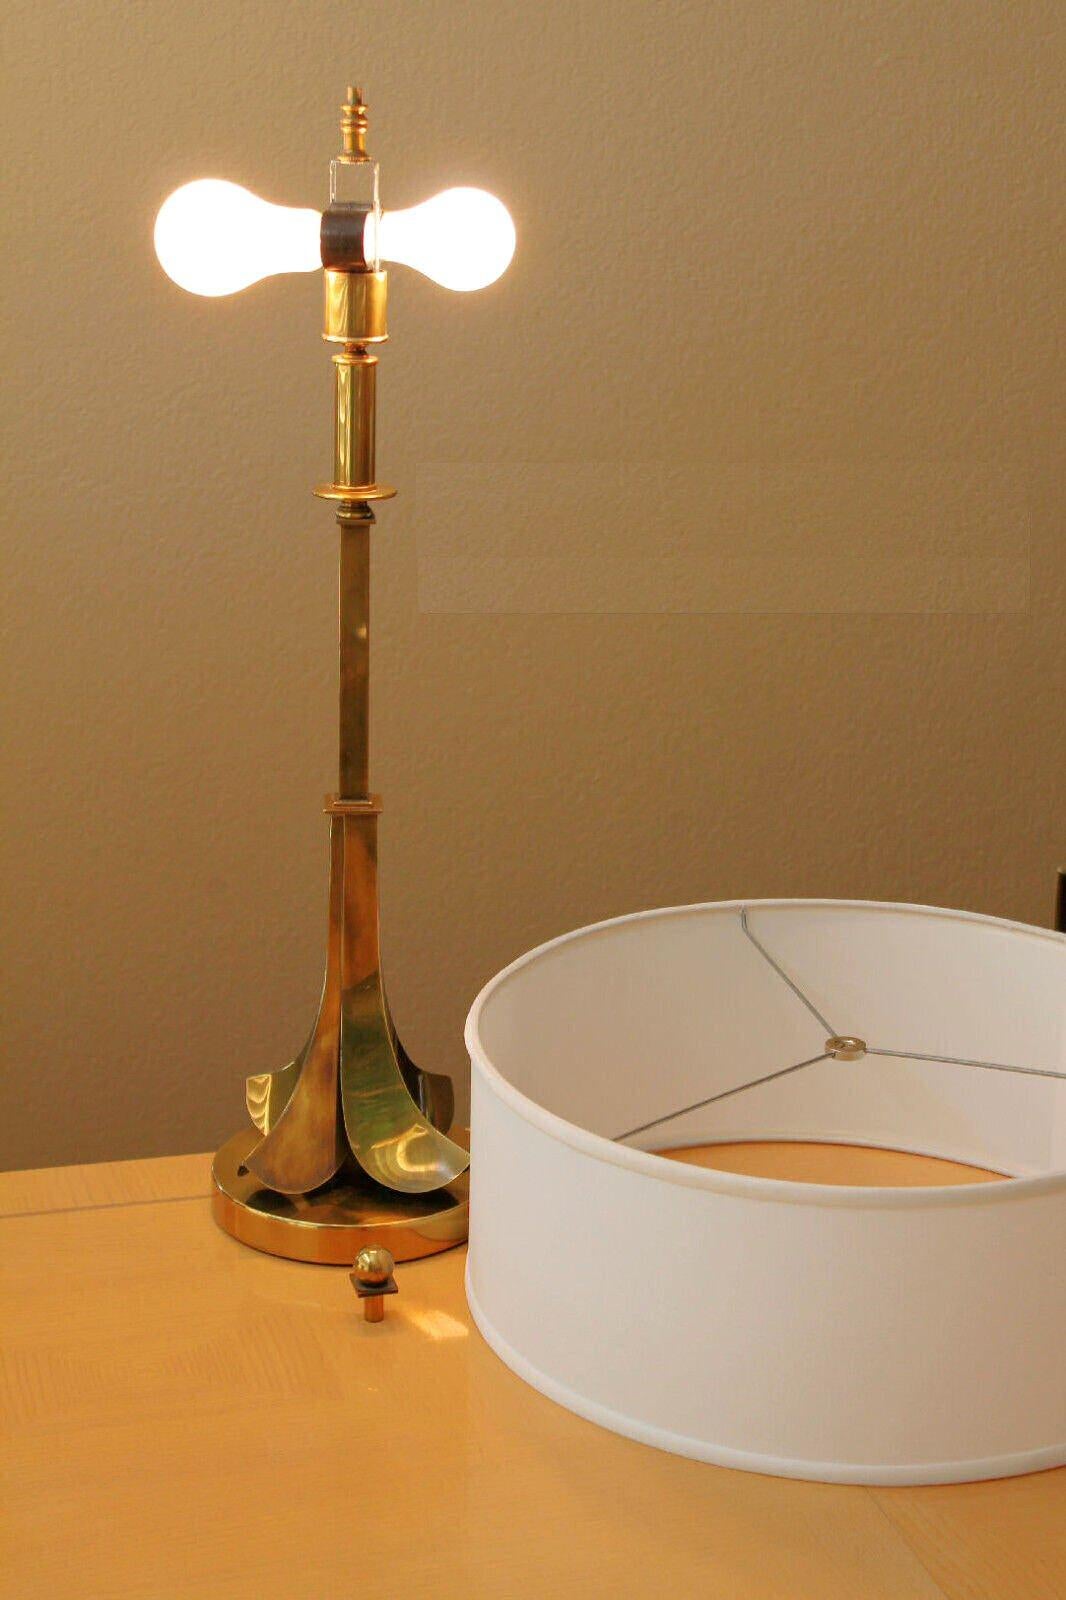 Rare HART Associates Mid Century Modern Brass Abstract Palm Celebrity Table Lamp In Good Condition For Sale In Peoria, AZ